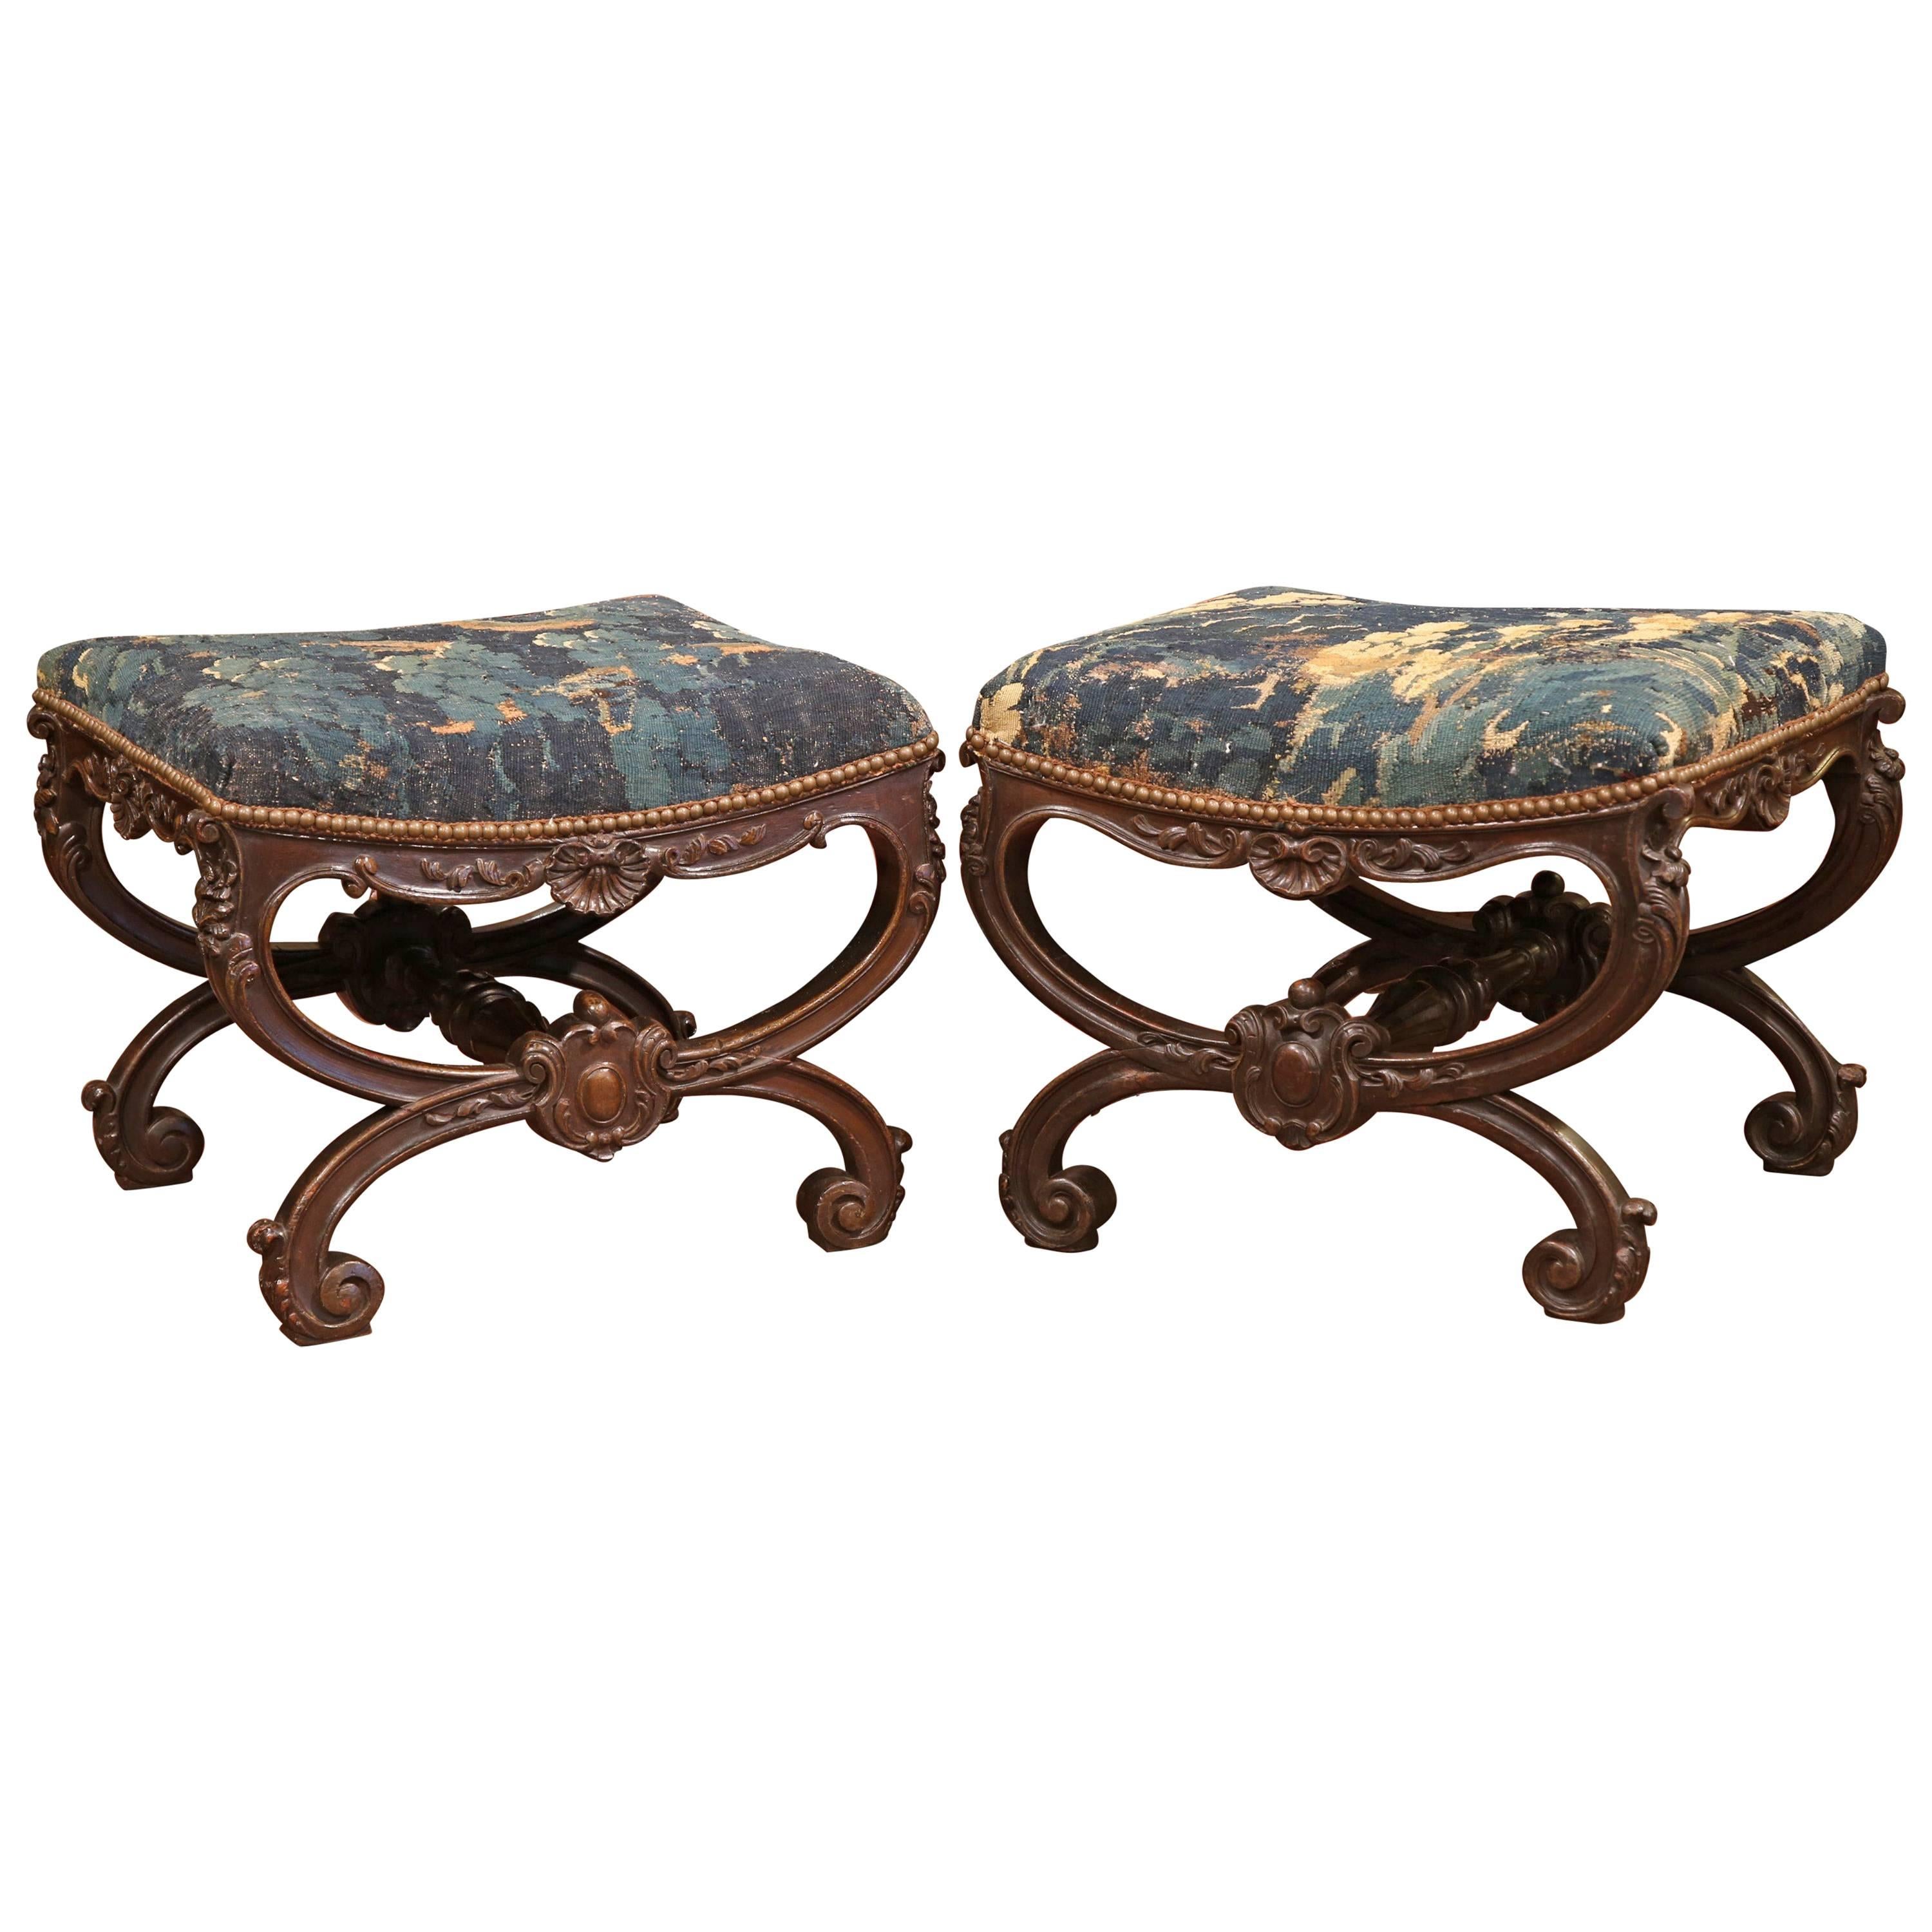 Pair of Early 19th Century French Louis XIV Carved Stools with Aubusson Tapestry